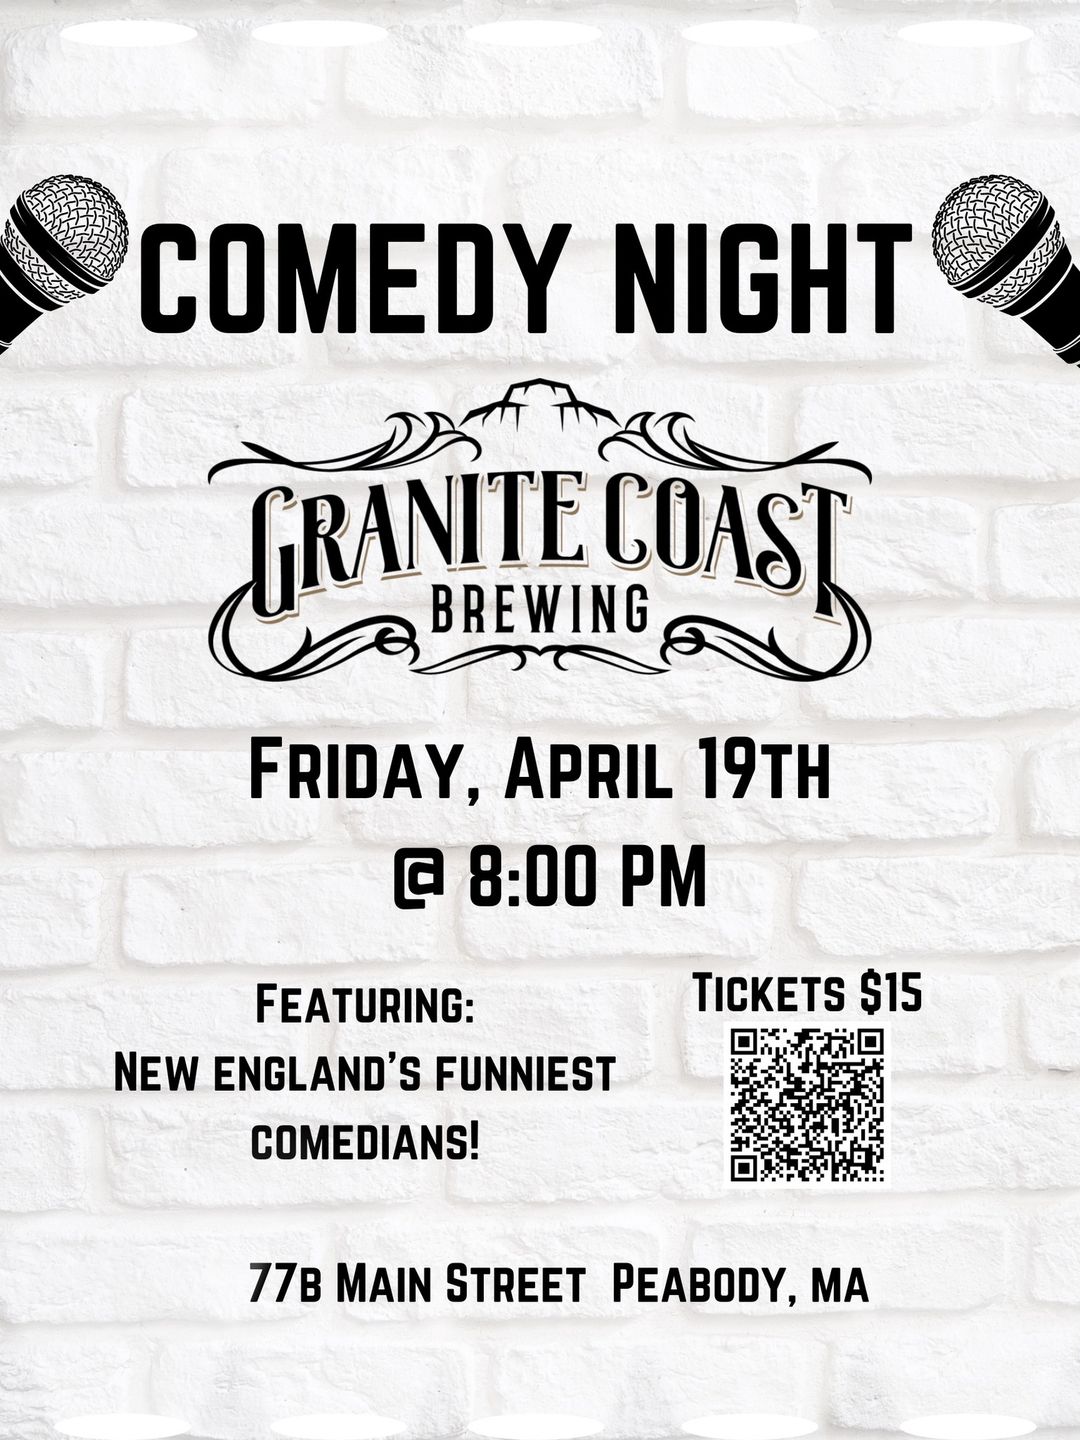 Laugh out loud at Granite Coast Brewing's Comedy Night! Join us to enjoy some of New England's funniest comedians on Friday, April 19th at 8pm. Tickets are just $15. Don't miss a night of laughs and craft beer - it's sure to be a barrel of fun!